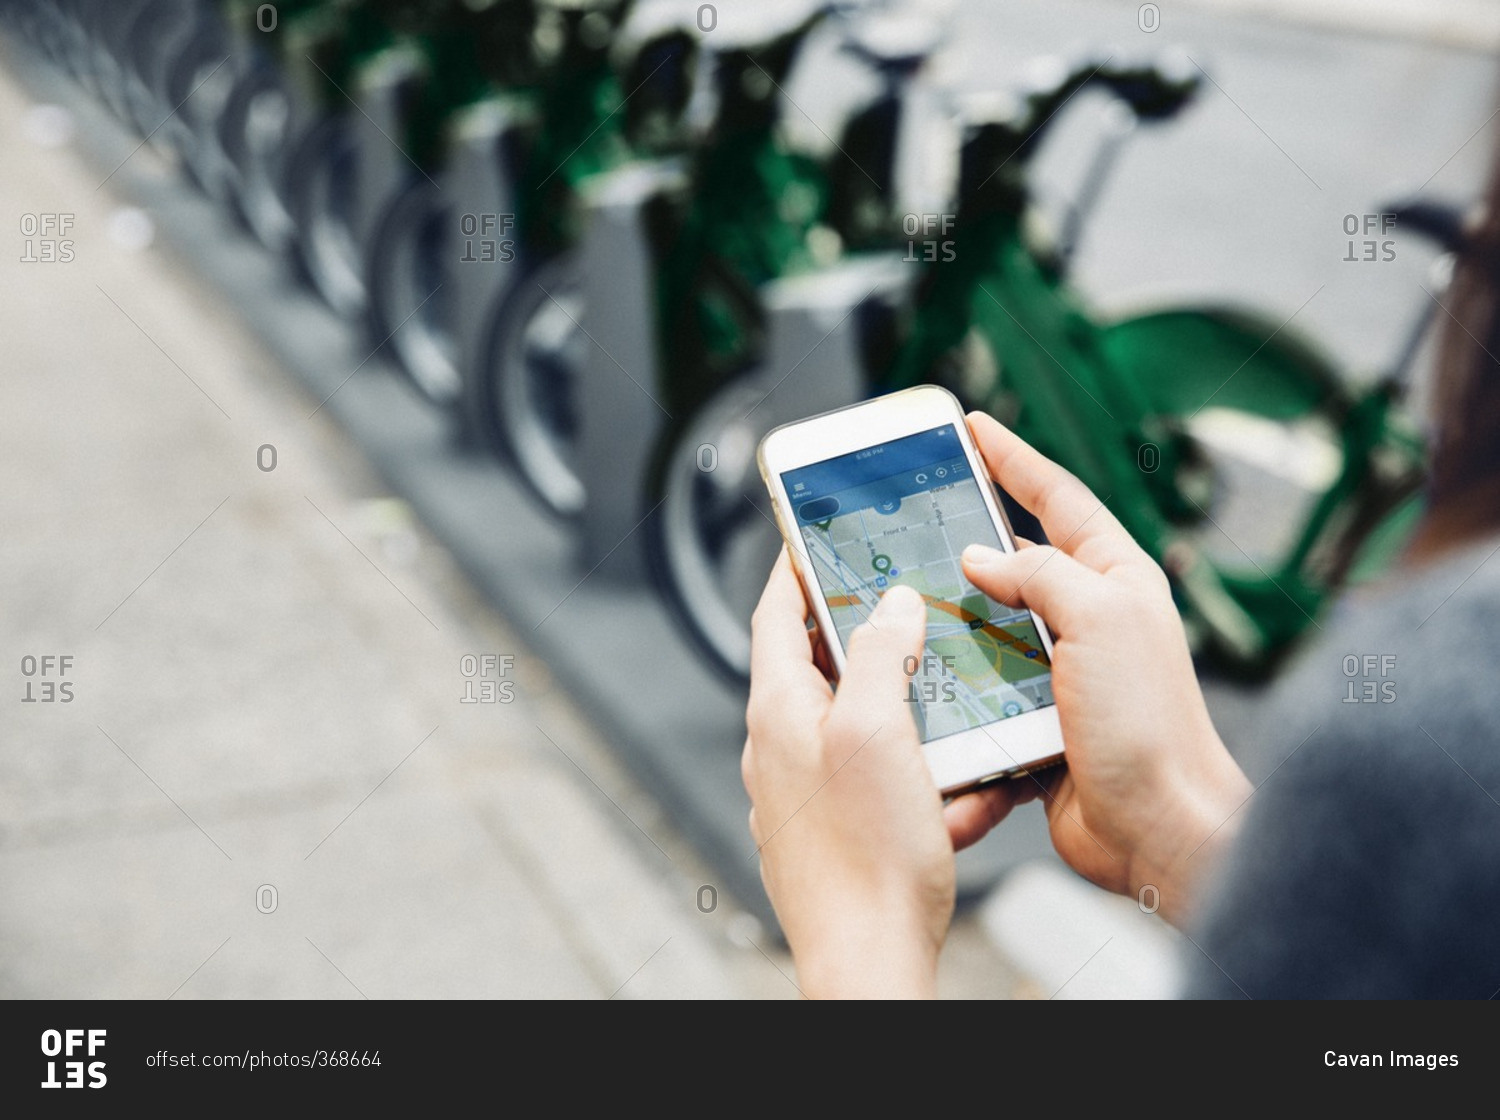 High angle view of woman using smart phone by bicycle rack on street